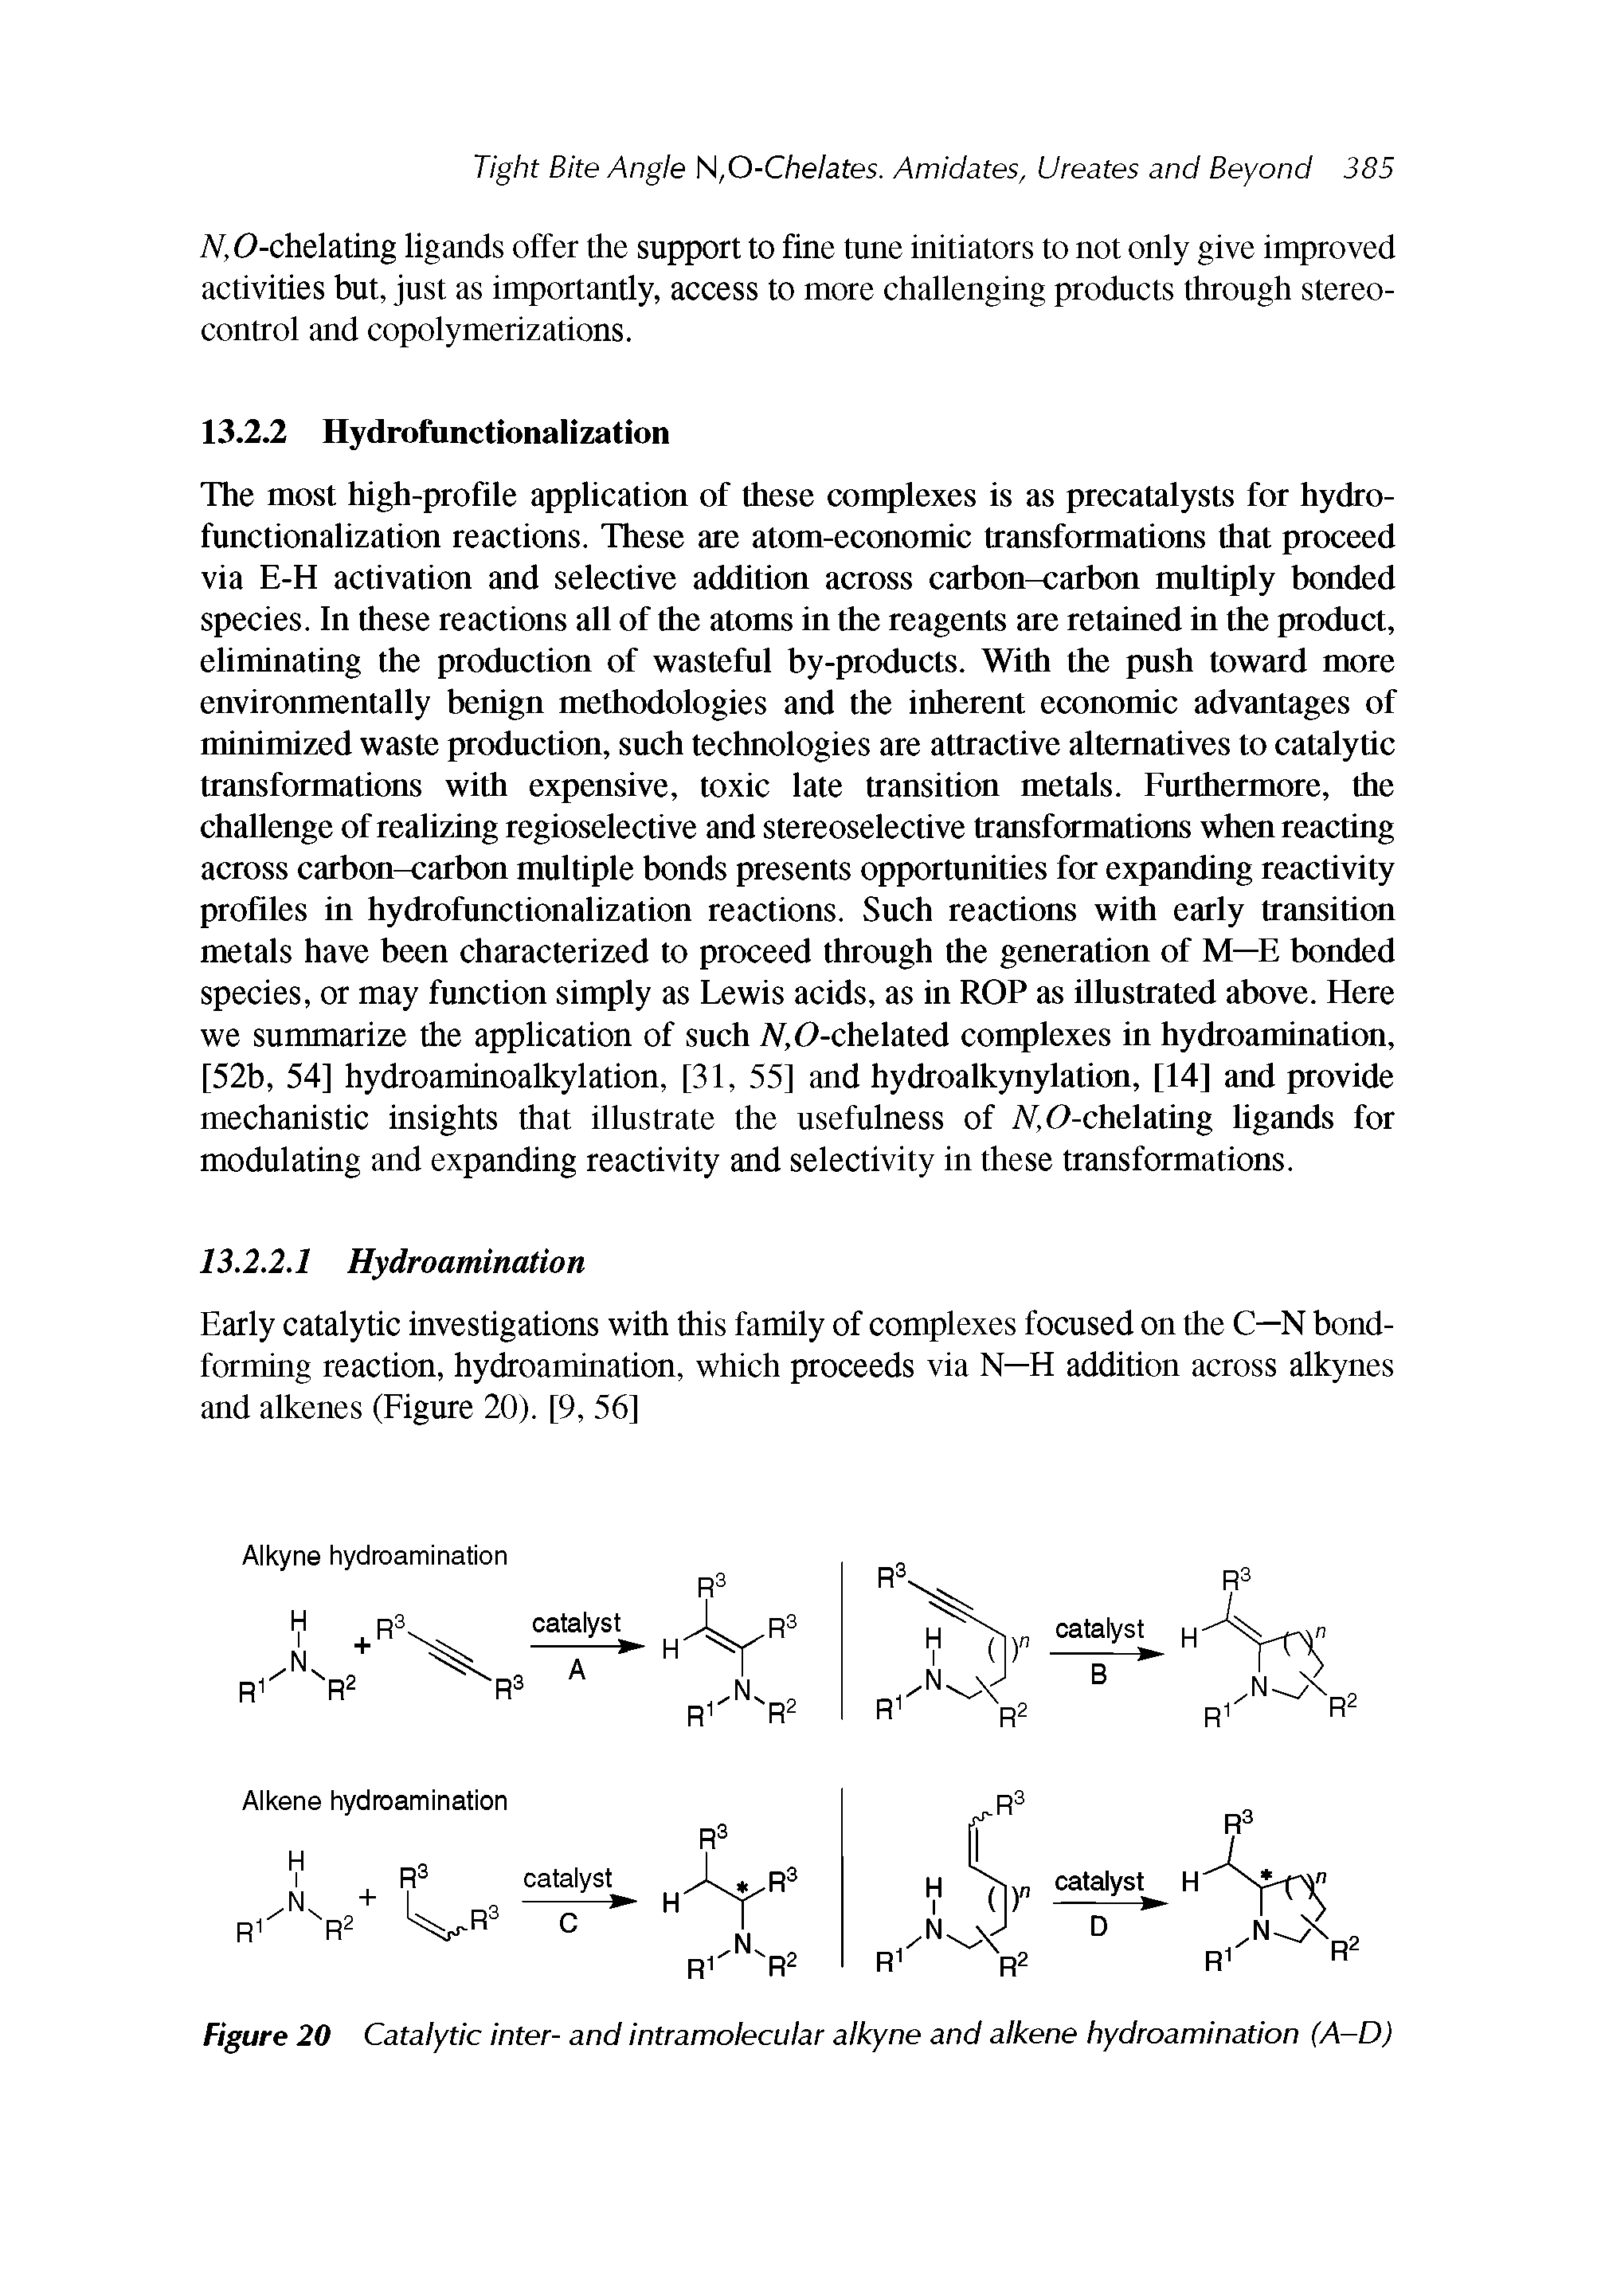 Figure 20 Catalytic inter- and intramolecular alkyne and alkene hydroamination (A-D)...